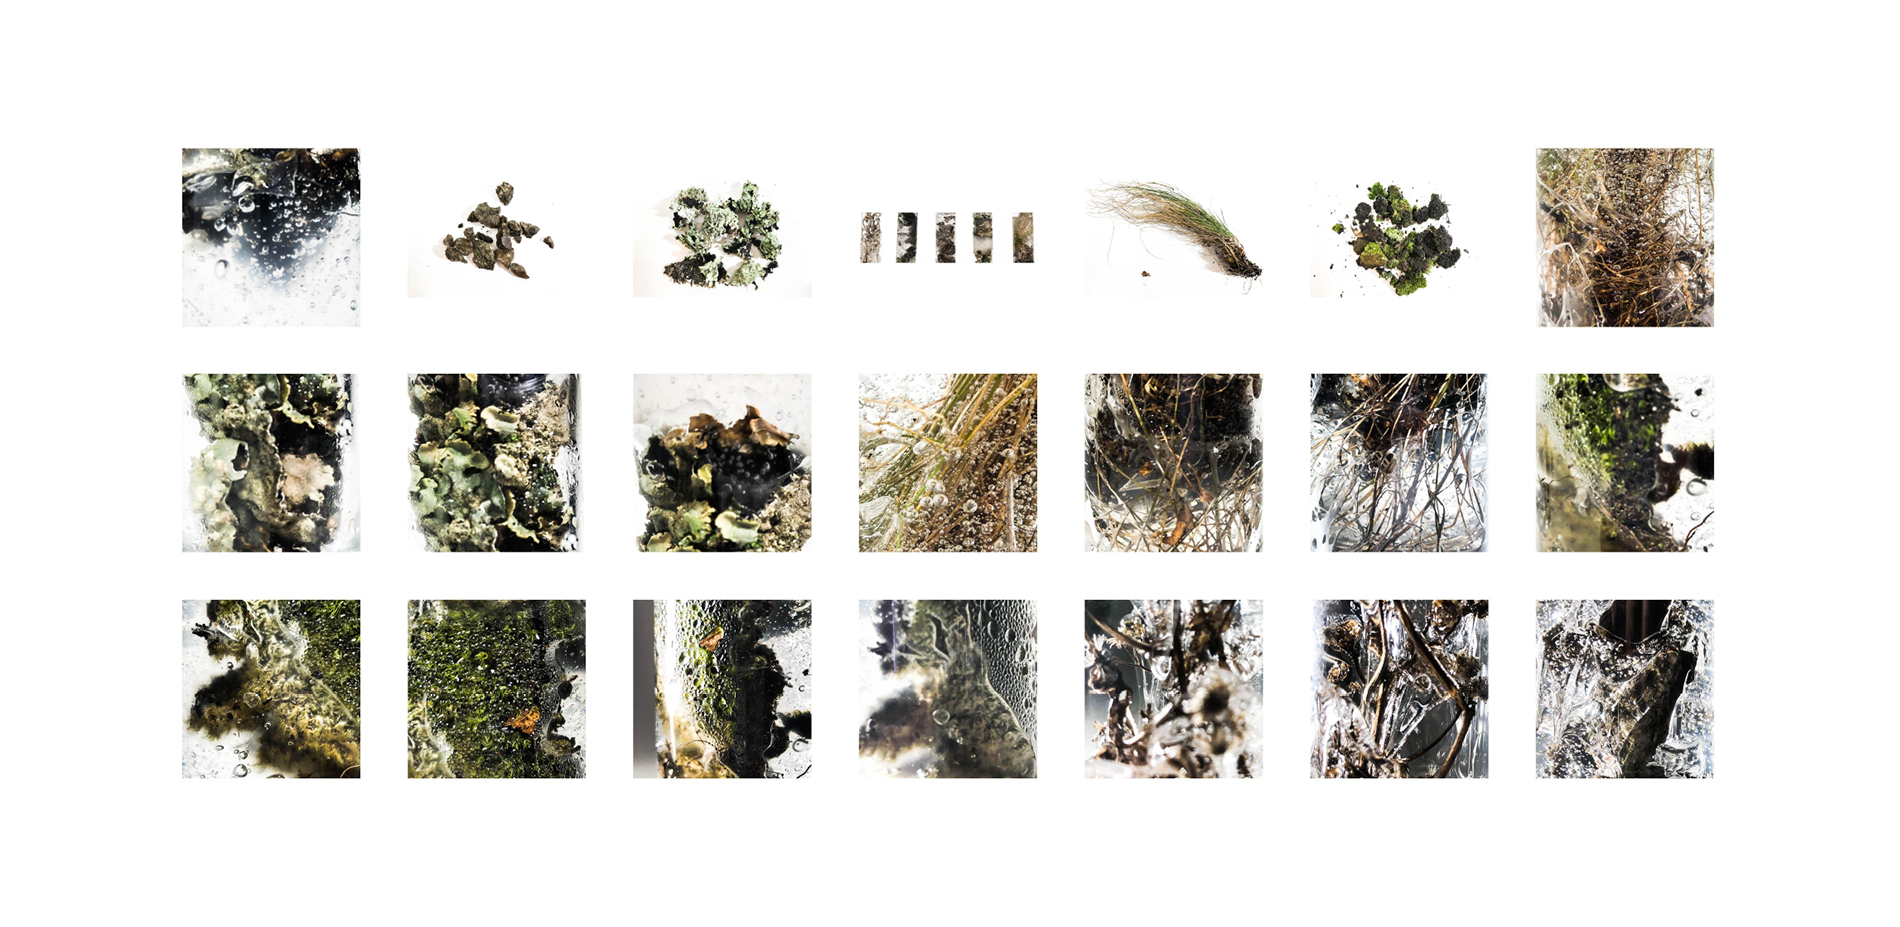 Material Taxonomy: Lichens & Soil Compound